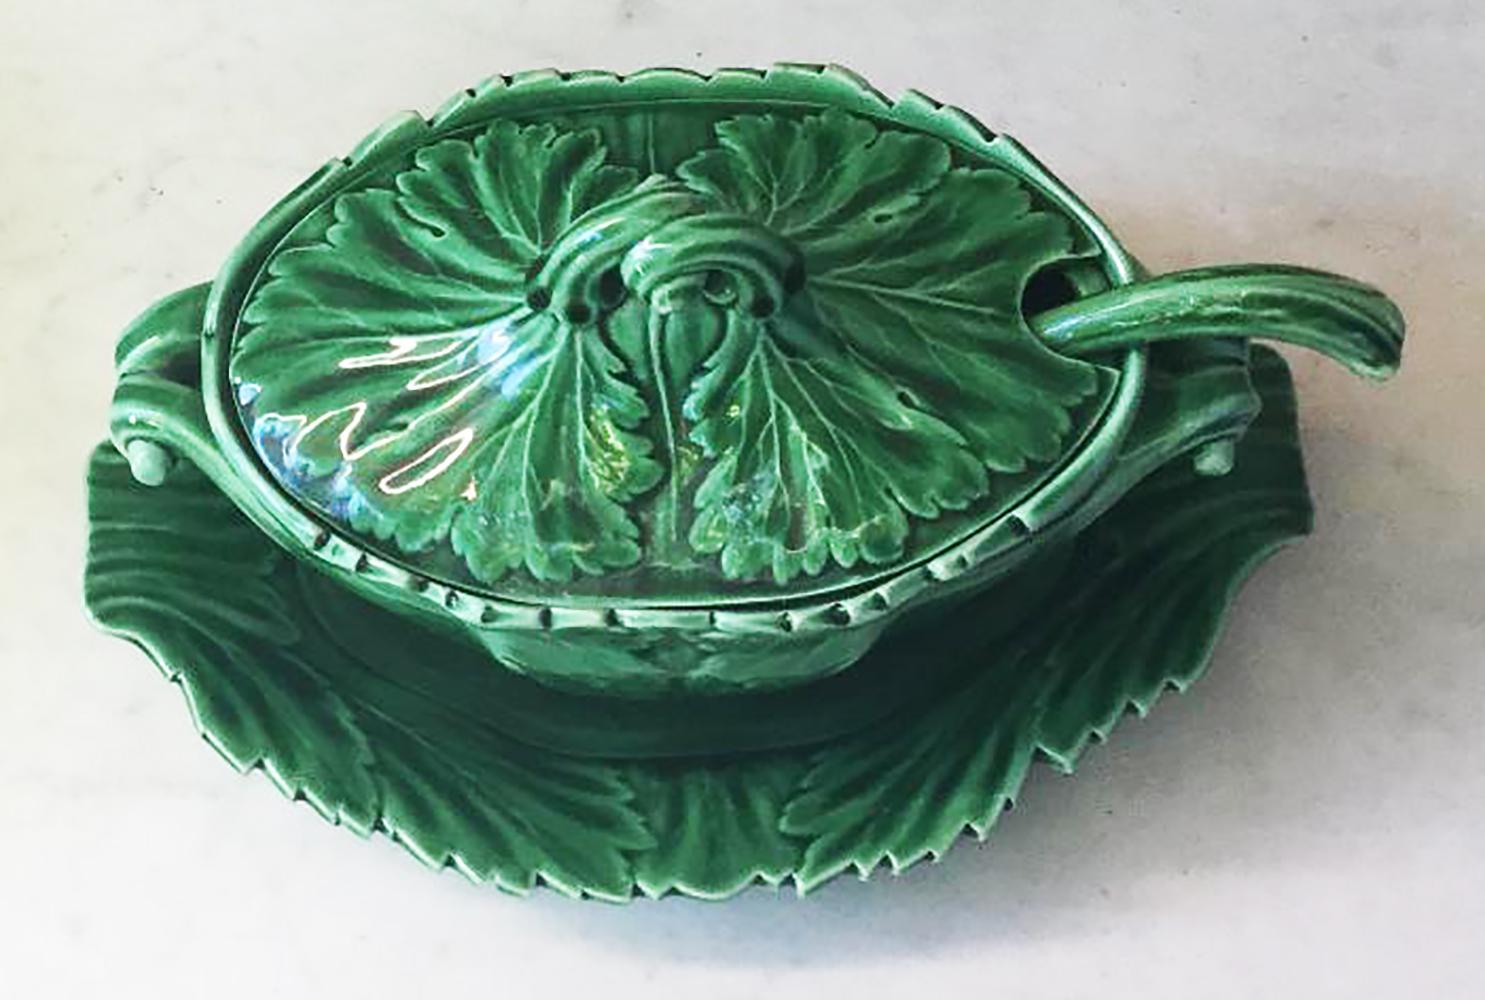 19th century Classical Victorian green Majolica tureen with ladle and stand signed Spode.
The tureen is decorated with leaves.
Tureen / 8